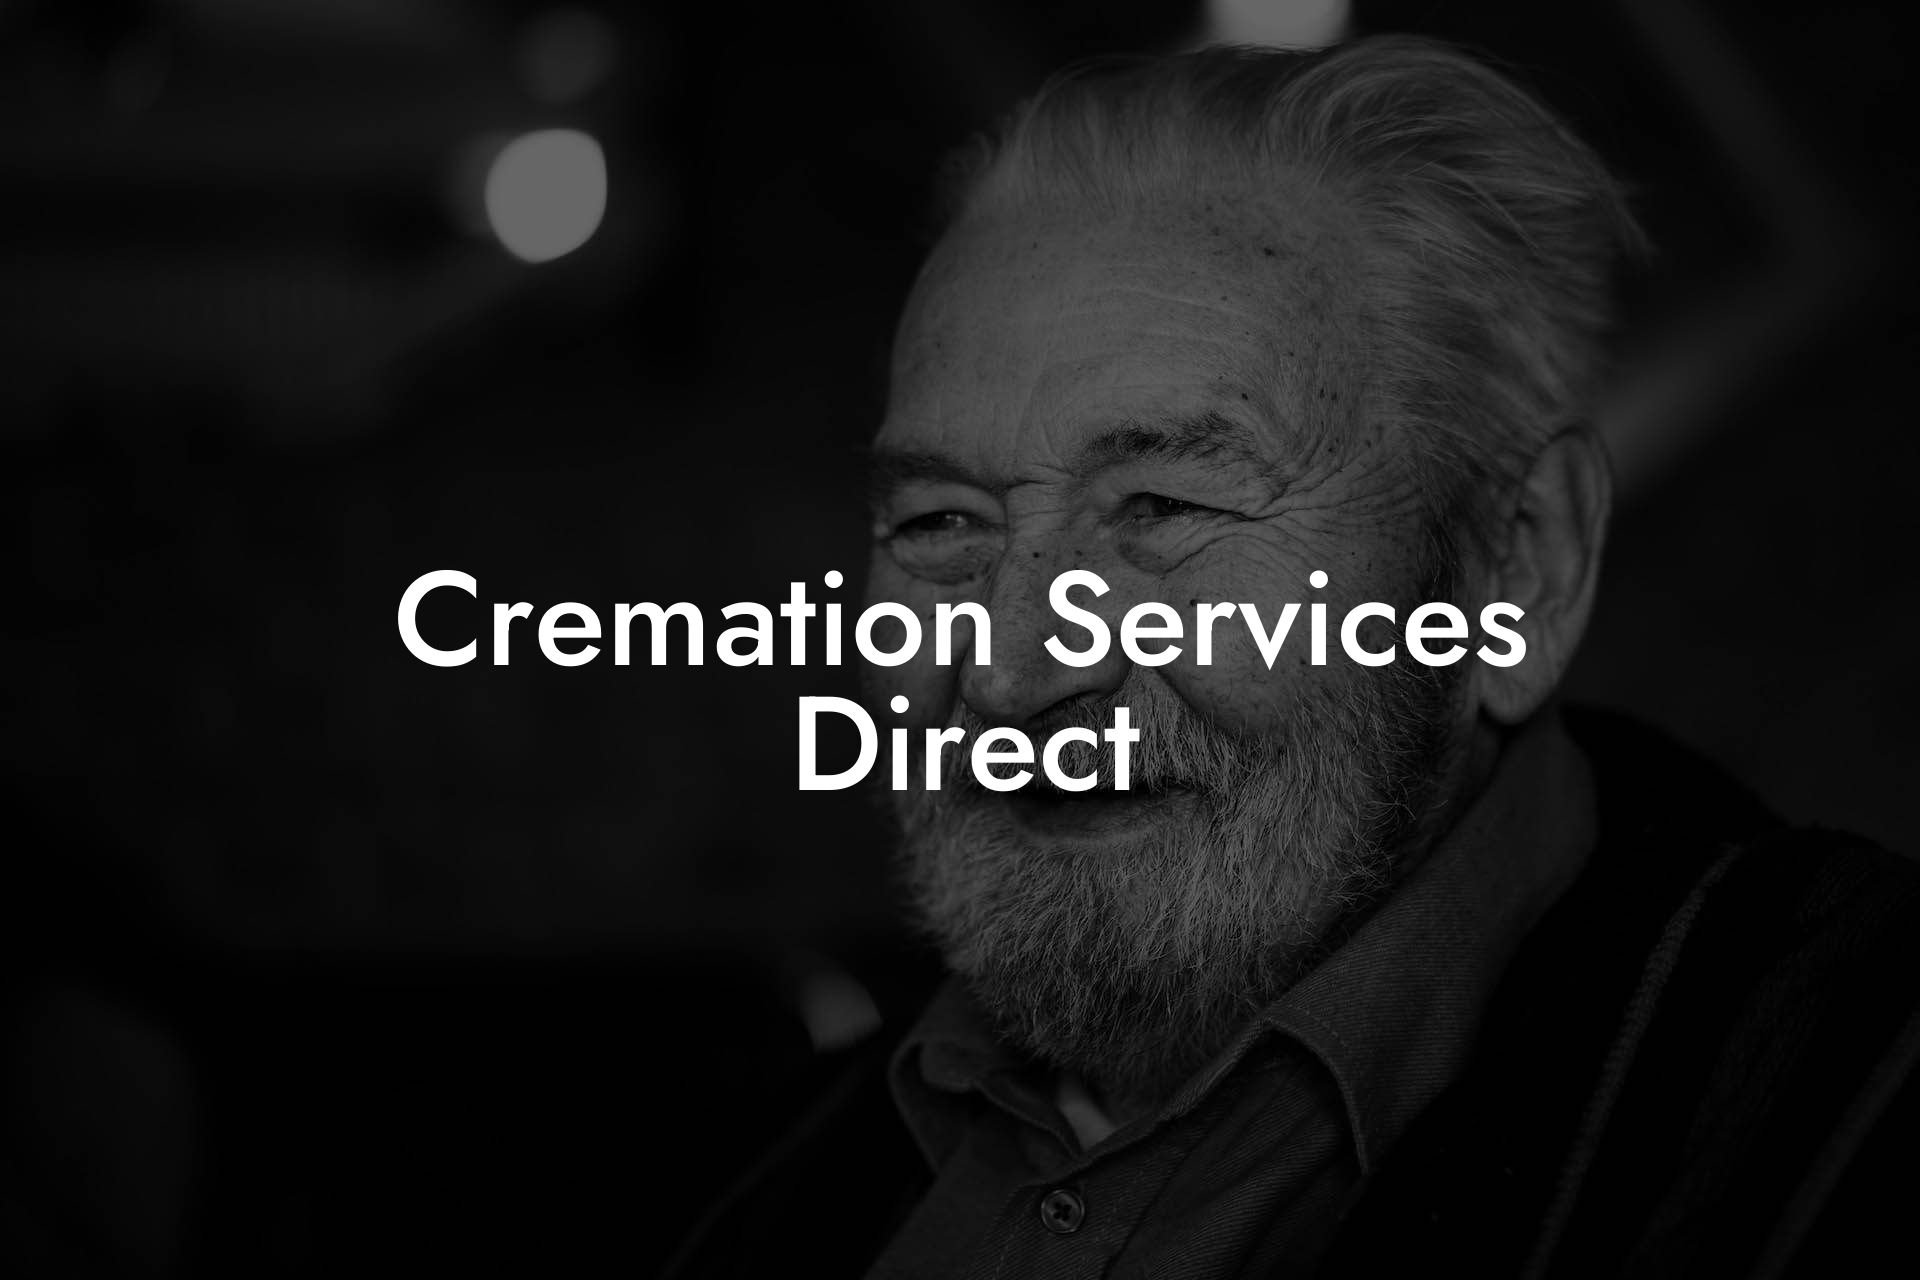 Cremation Services Direct